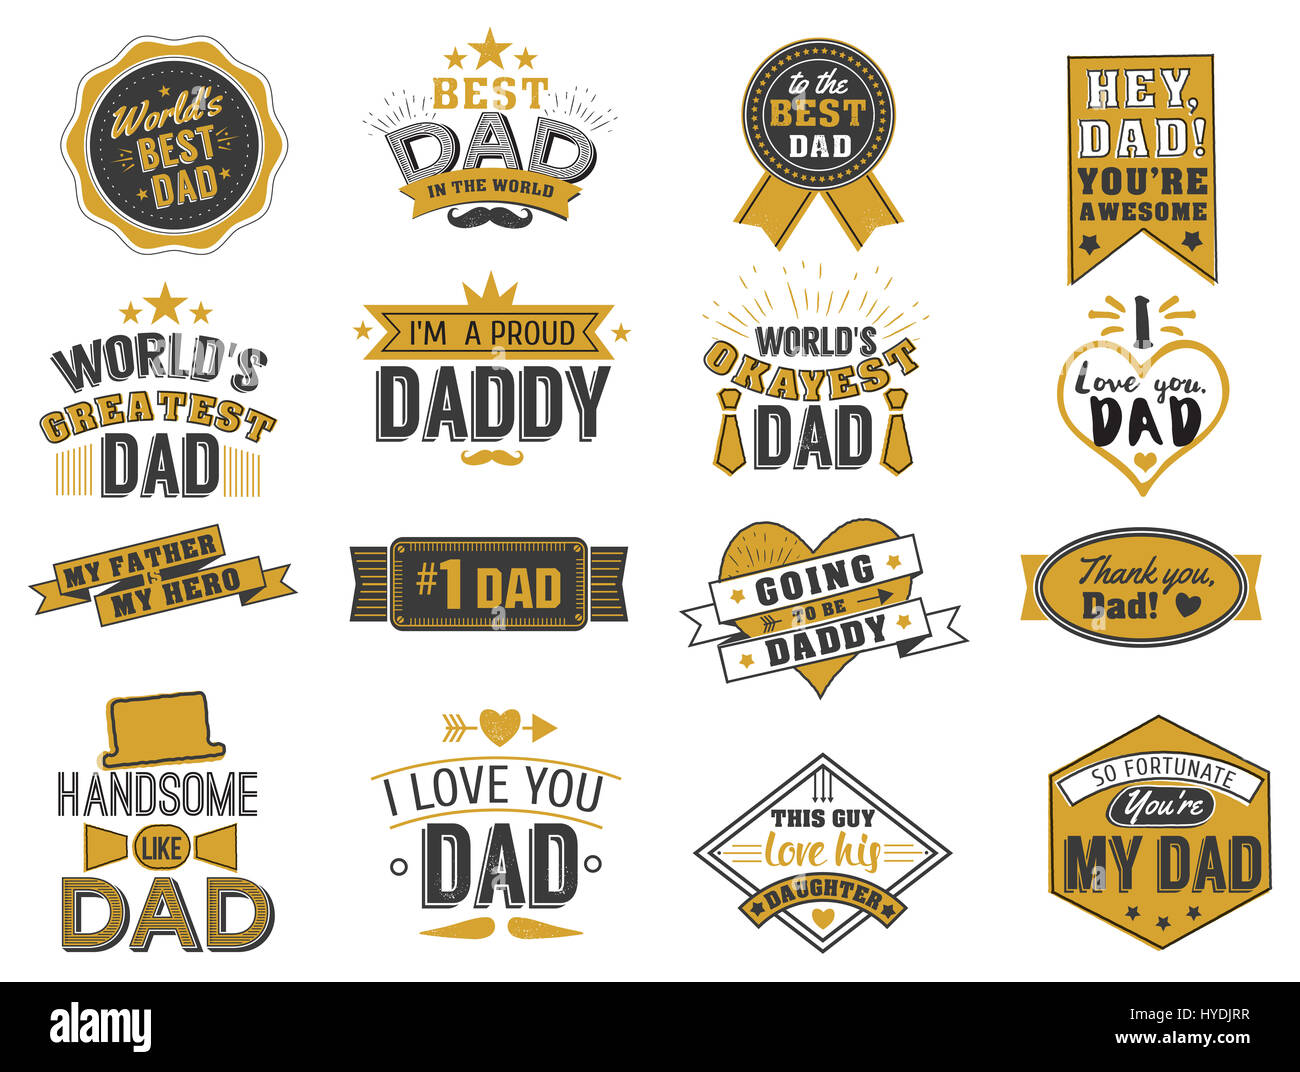 Isolated Happy fathers day quotes on the white background. Dad congratulation gold and black label, badge vector collection. Mustache, hat, stars elem Stock Photo